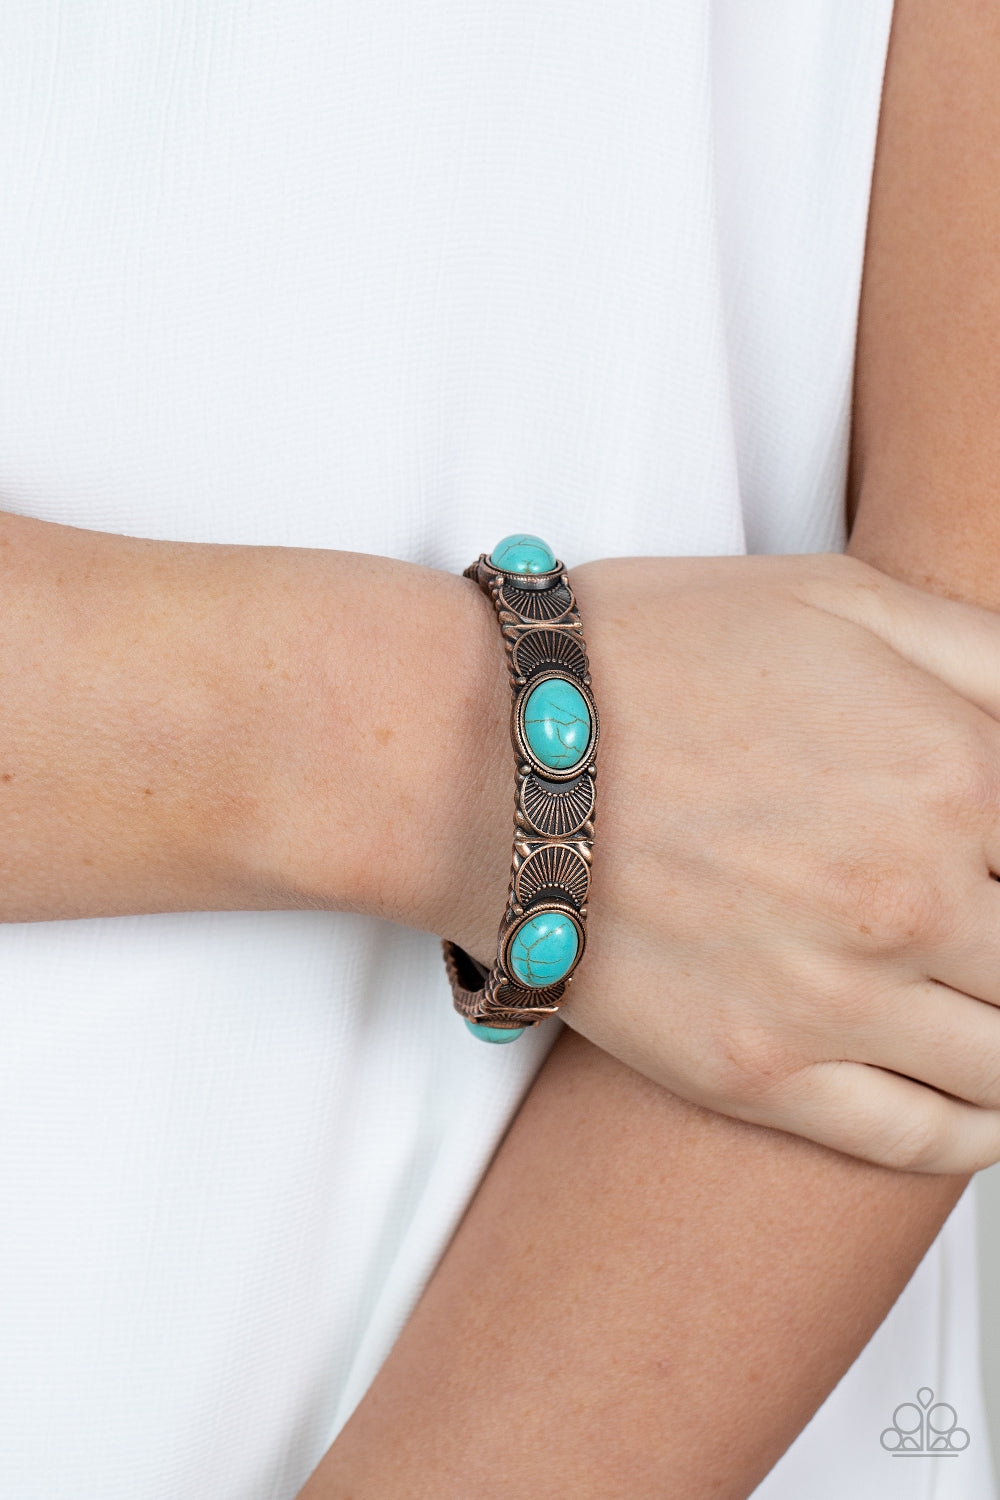 Desert Skyline - Copper and Turquoise Bracelet - Paparazzi Accessories - Flanked by copper half moon accents, turquoise stone dotted copper frames are threaded along stretchy bands around the wrist for a rustic flair.